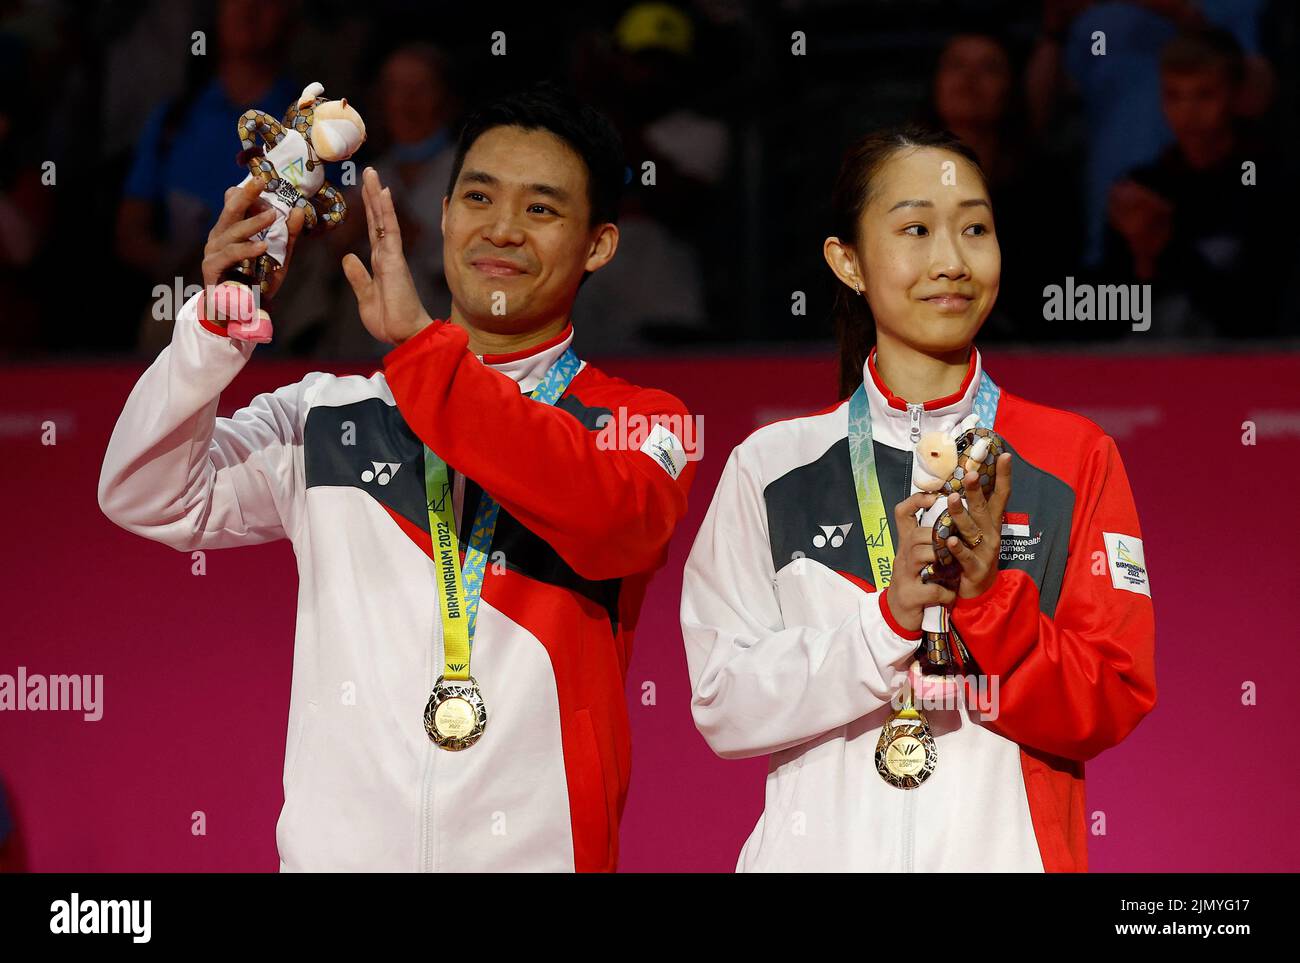 Commonwealth Games - Badminton - Mixed Doubles -Medal Ceremony -The NEC Hall 5, Birmingham, Britain - August 8, 2022 Gold Medallists Singapore's Yong Kai Terry Hee and Jessica Wei Han Tan celebrate on the podium during the medal ceremony REUTERS/Jason Cairnduff Stock Photo